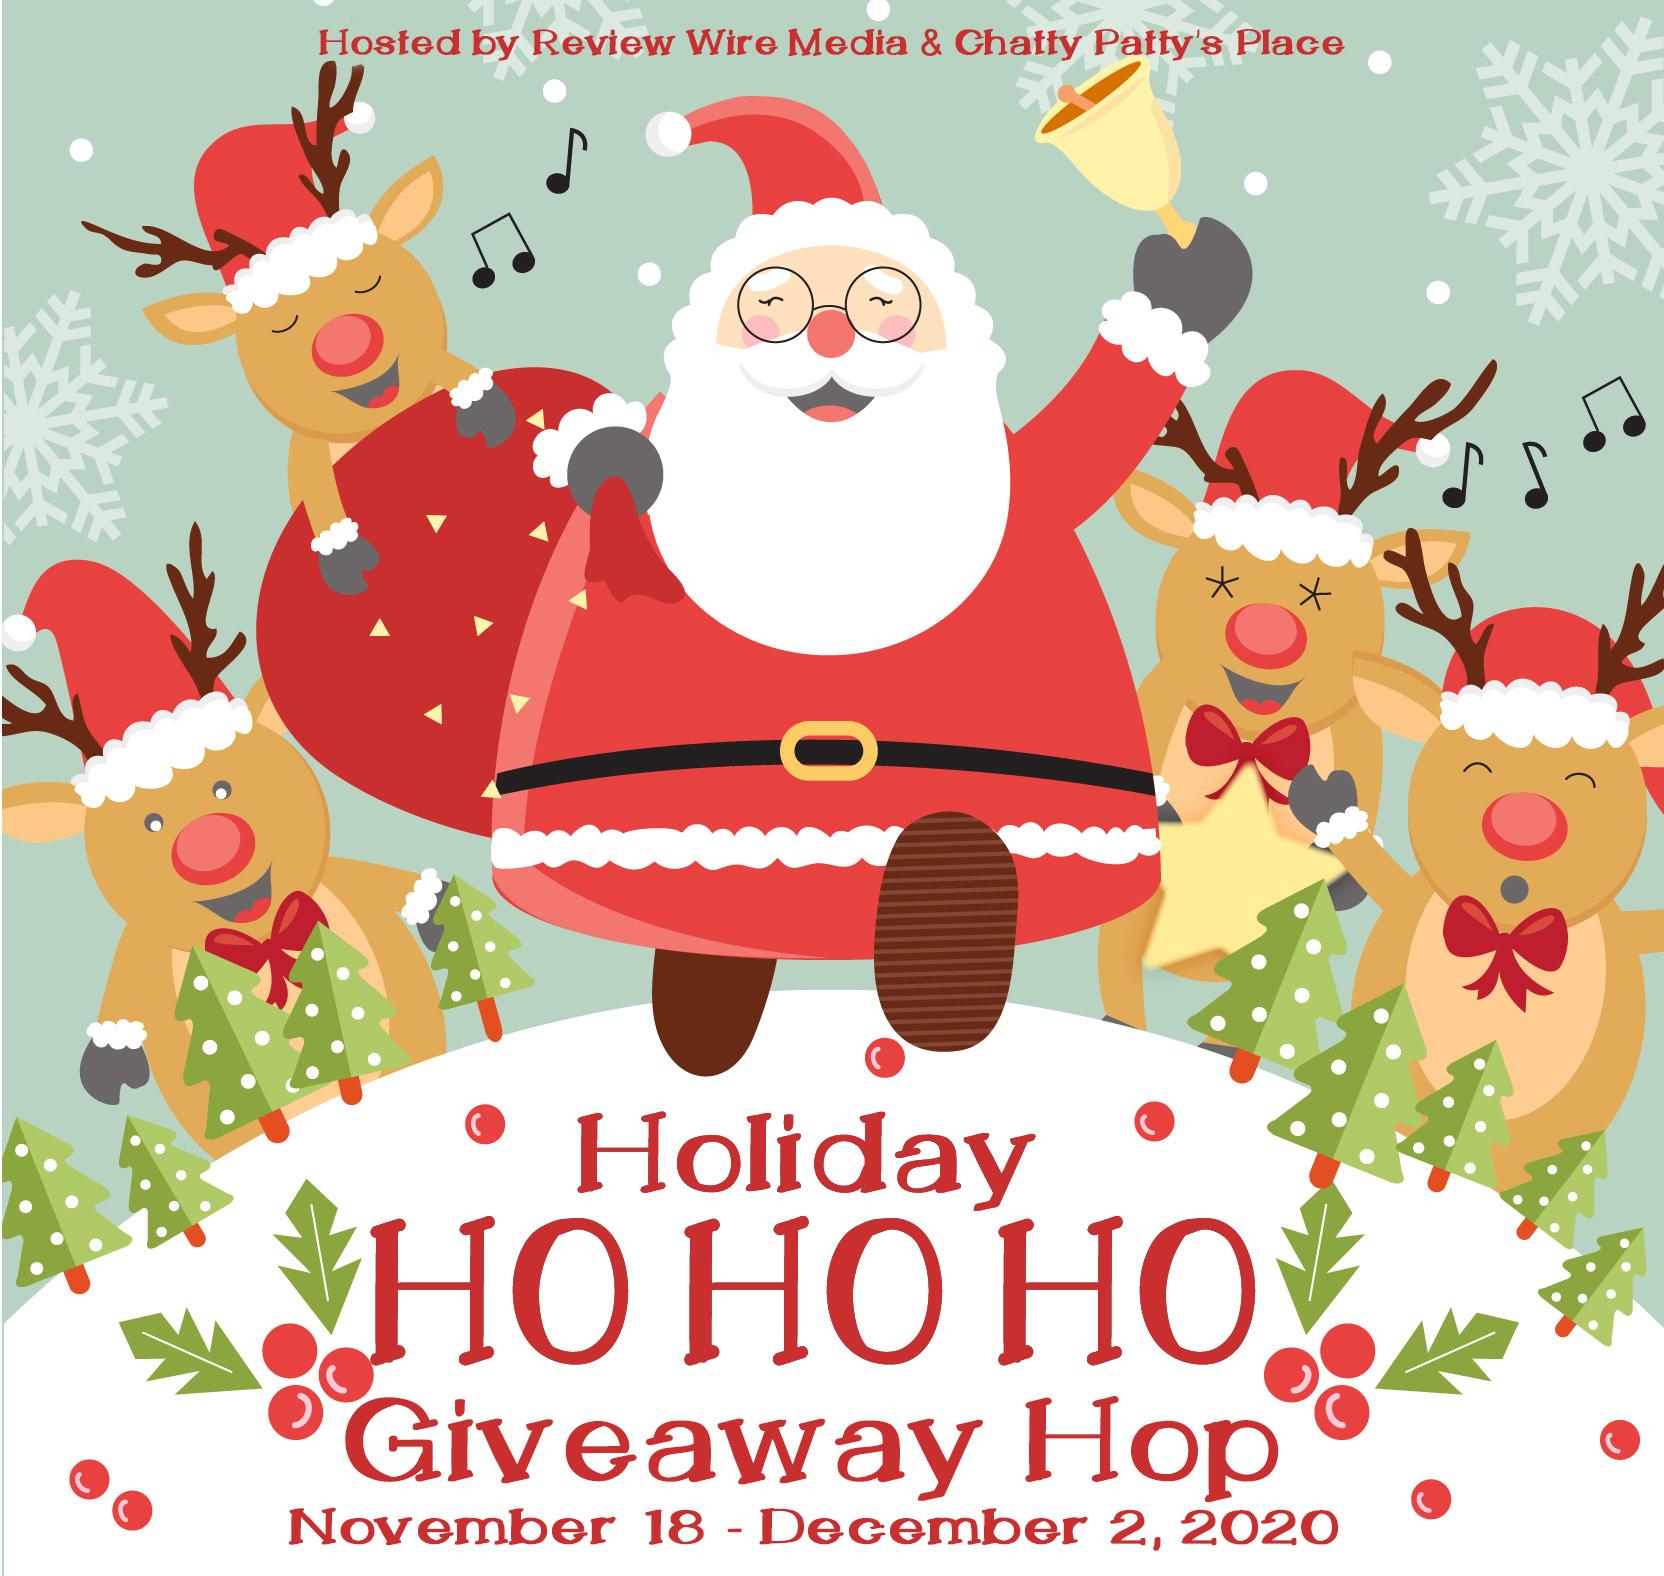 The Review Wire: Holiday HoHoHo Giveaway Hop